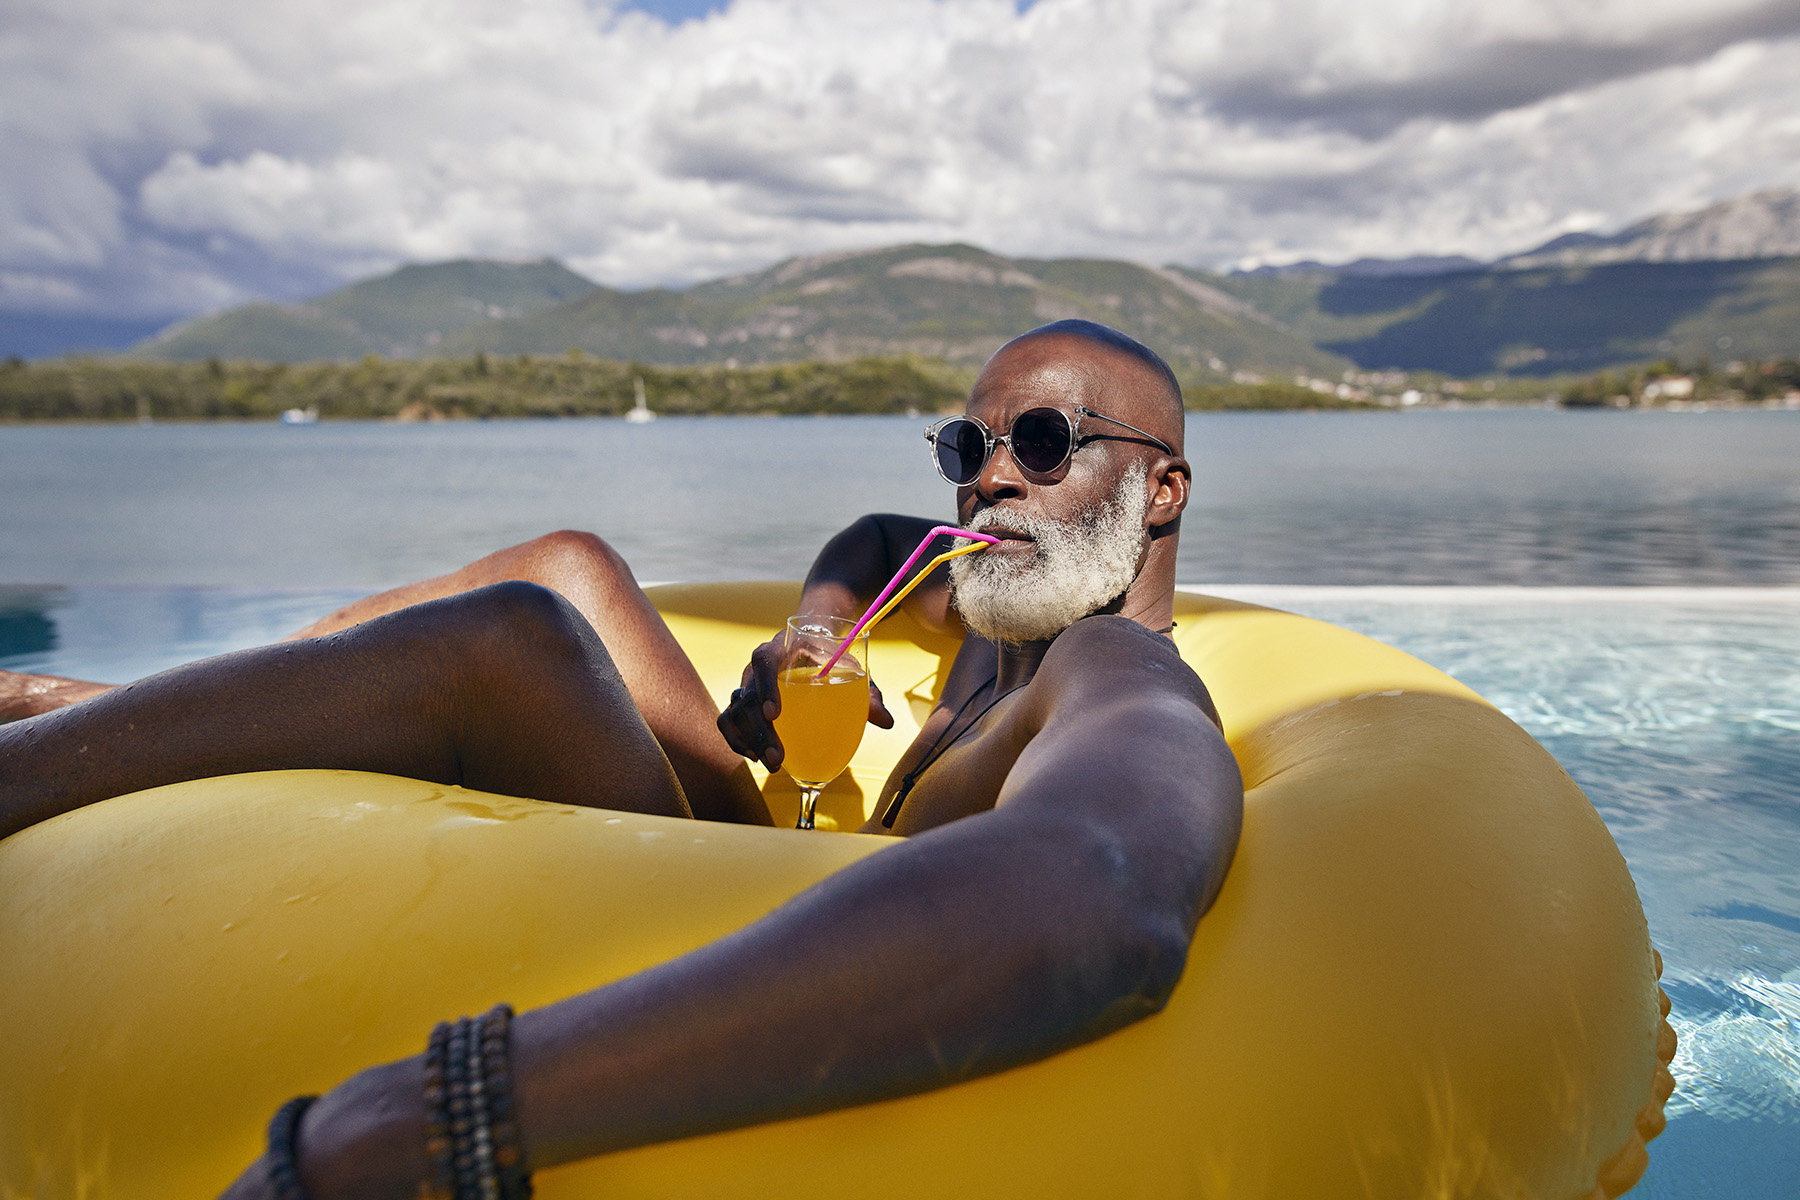 Bald man wearing sunglasses and drinking juice from a fancy glass, while chilling in a yellow inflatable ring in the pool during vacation.